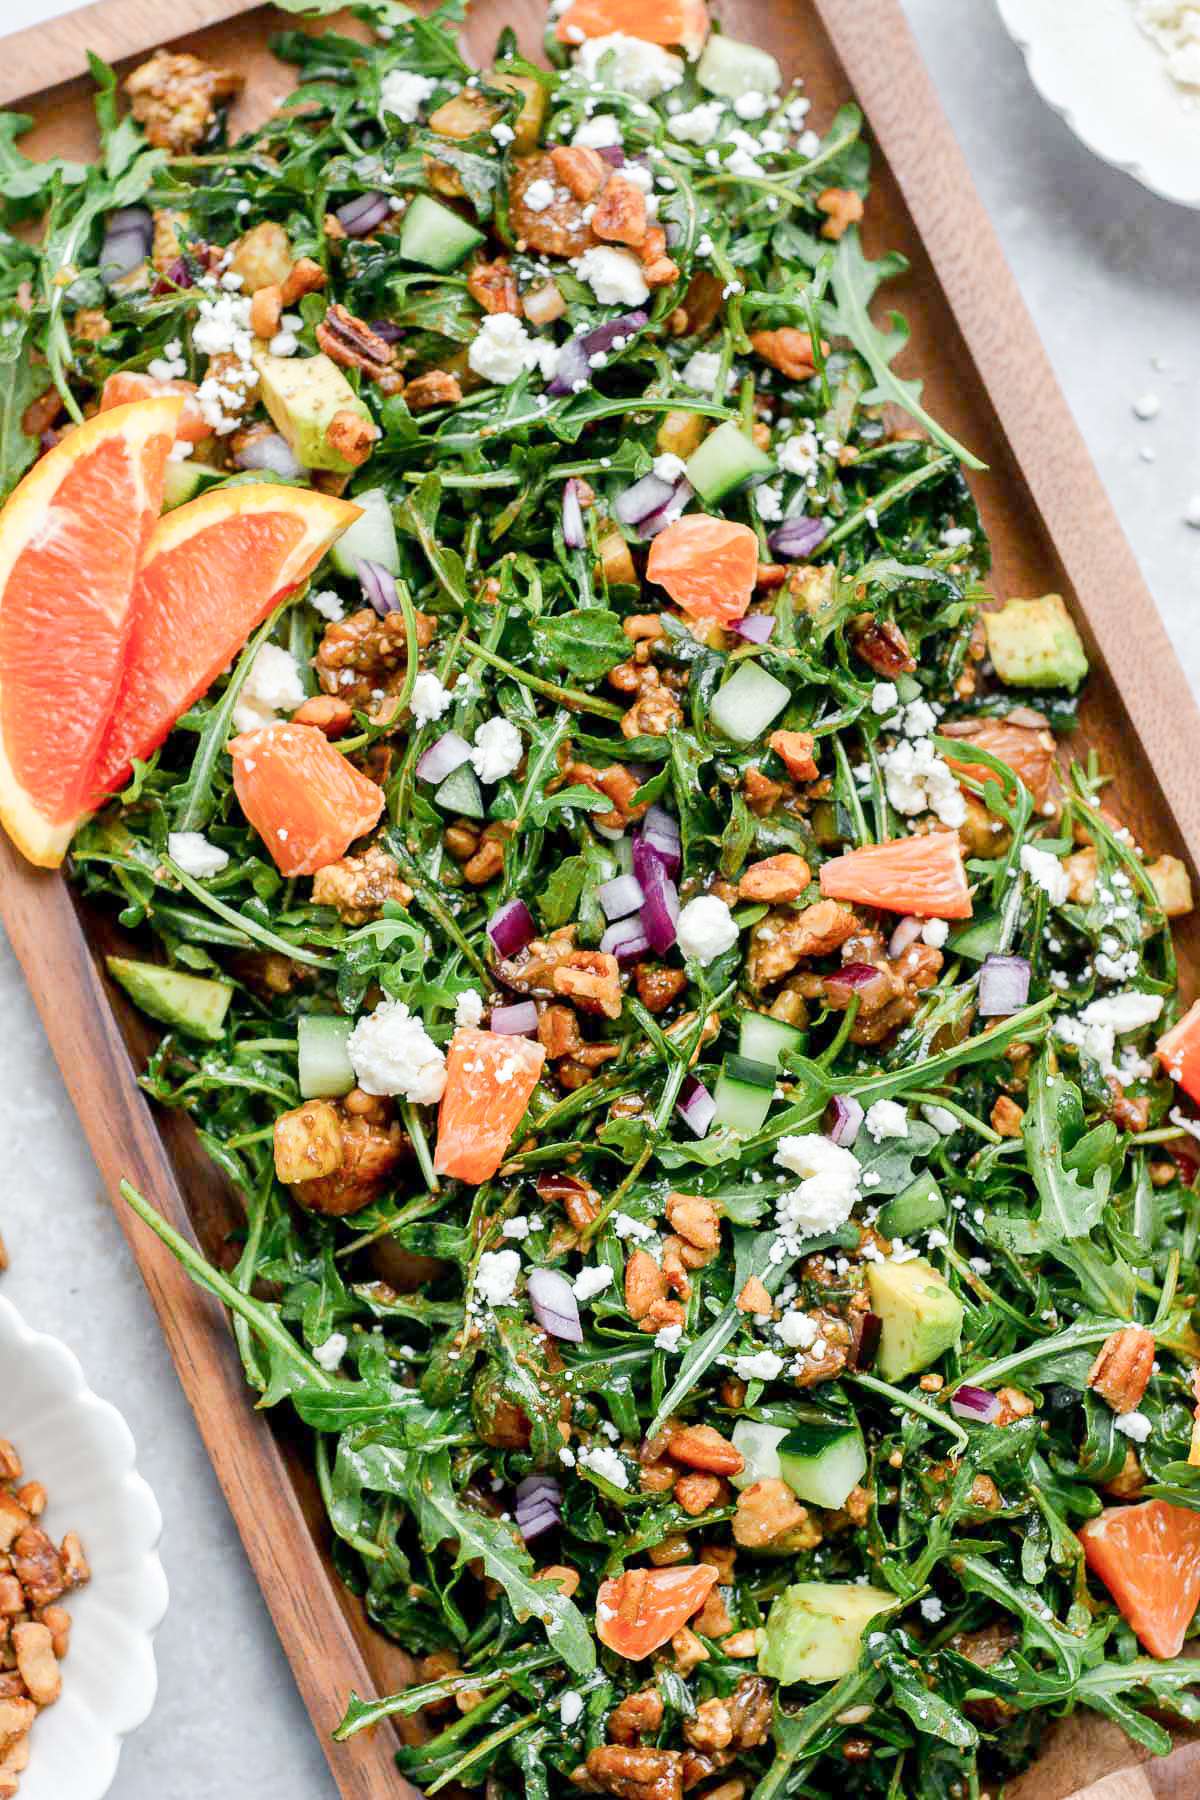 Arugula salad topped with orange, pecans, and feta cheese.